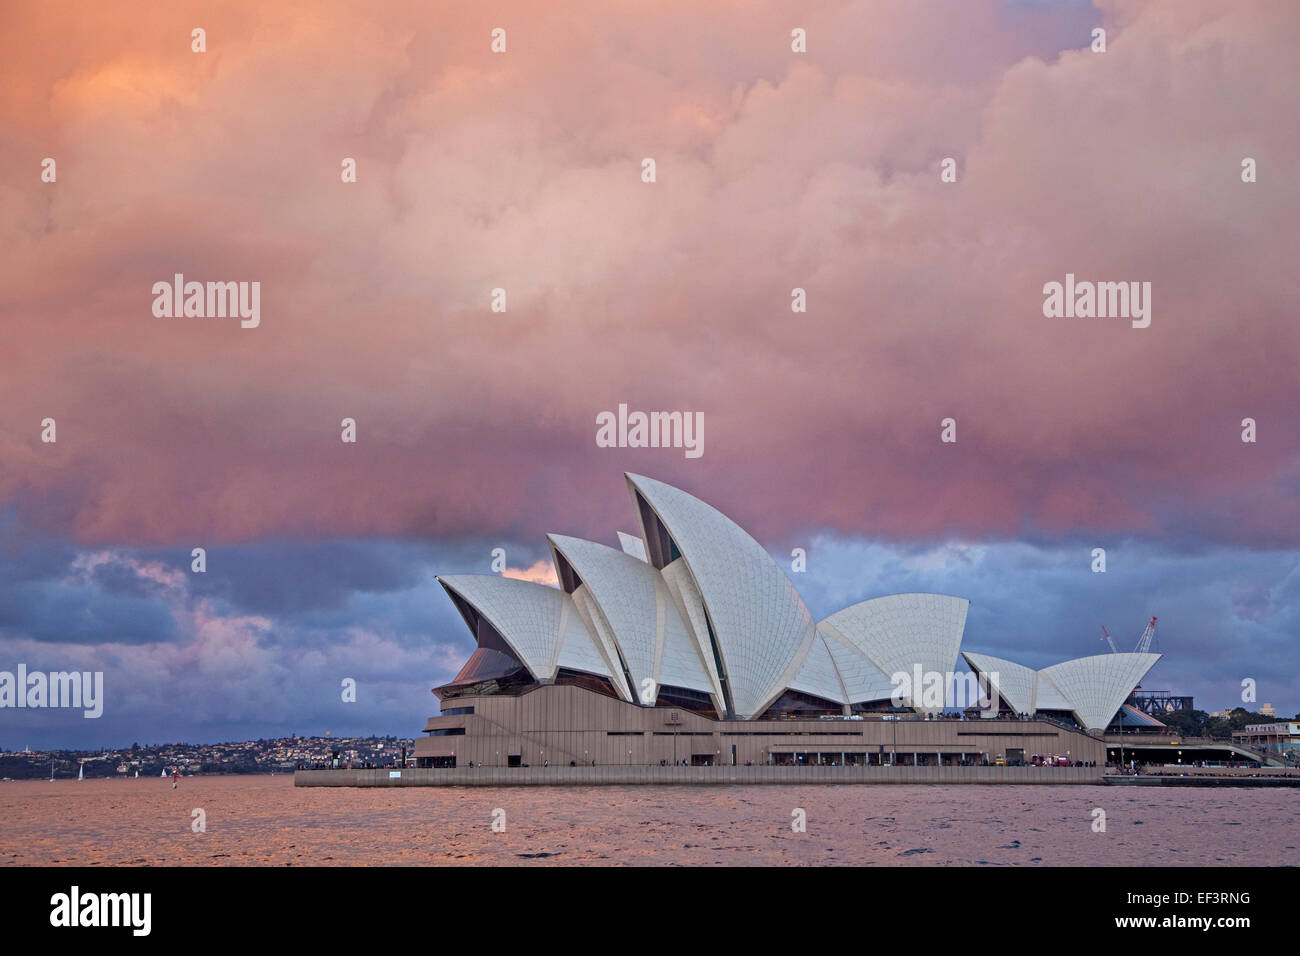 Heavy rain clouds and approaching thunderstorm over the Sydney Opera House at sunset, New South Wales, Australia Stock Photo